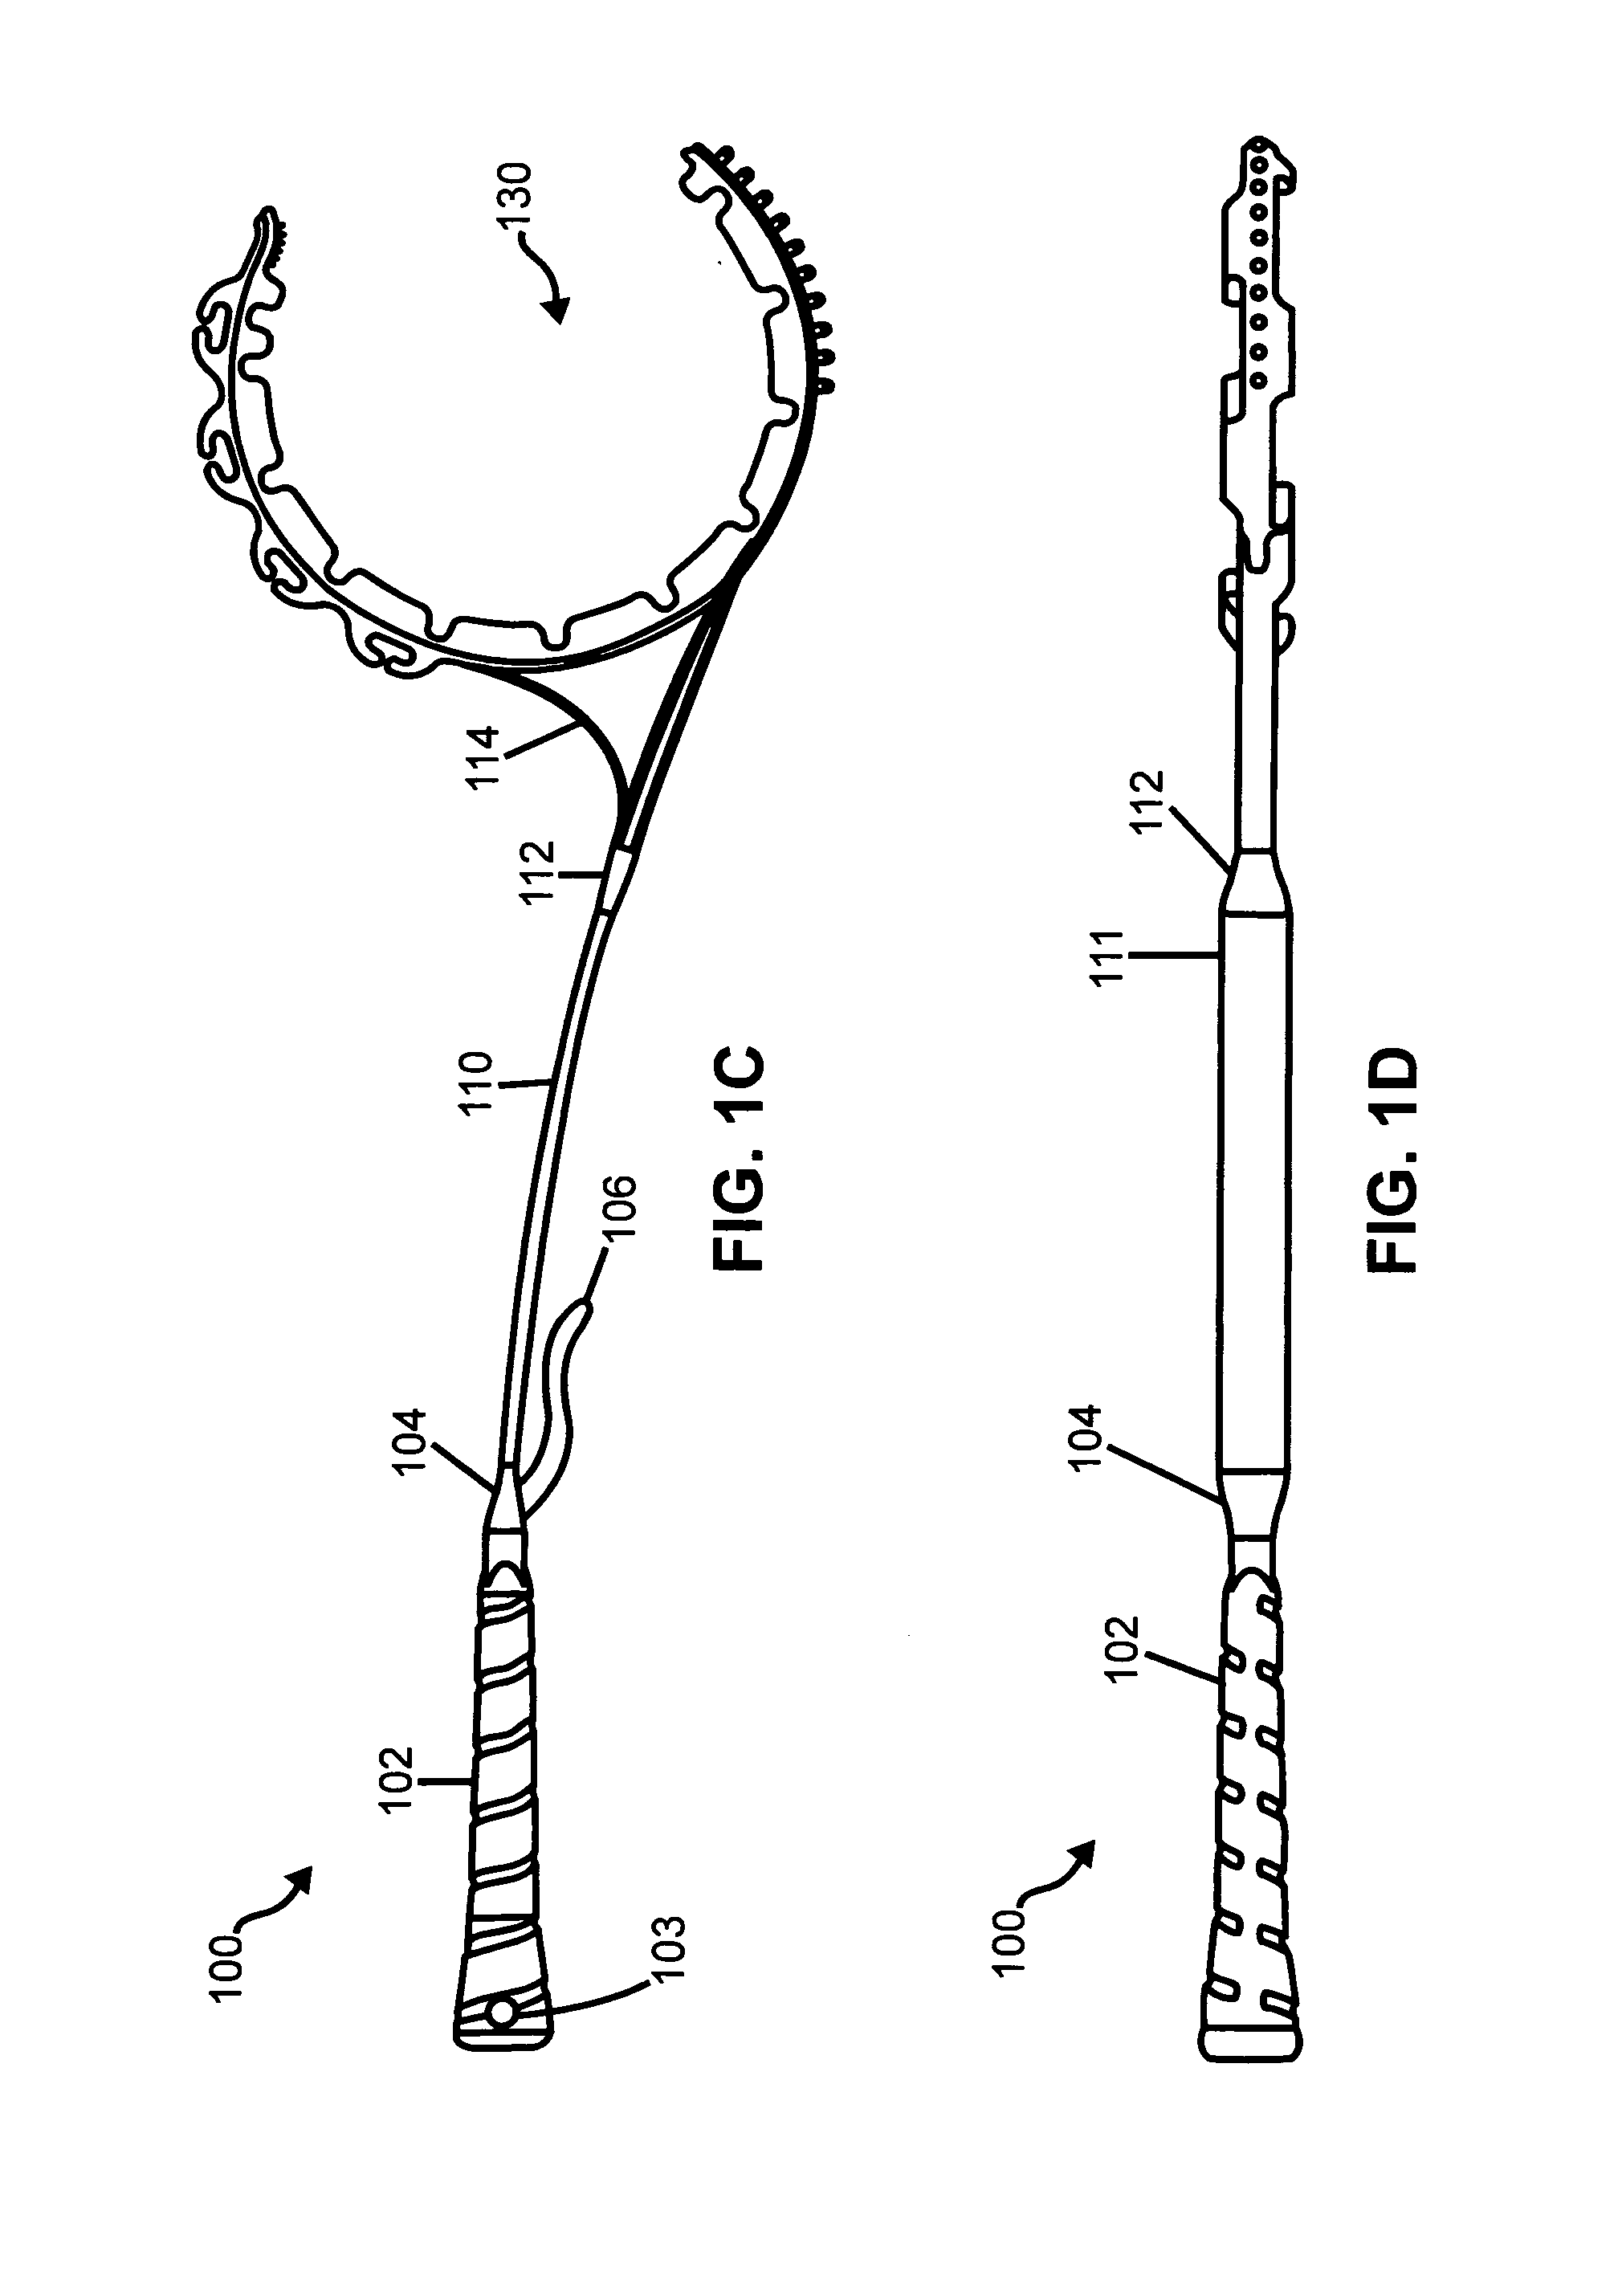 Disk launching apparatus and method